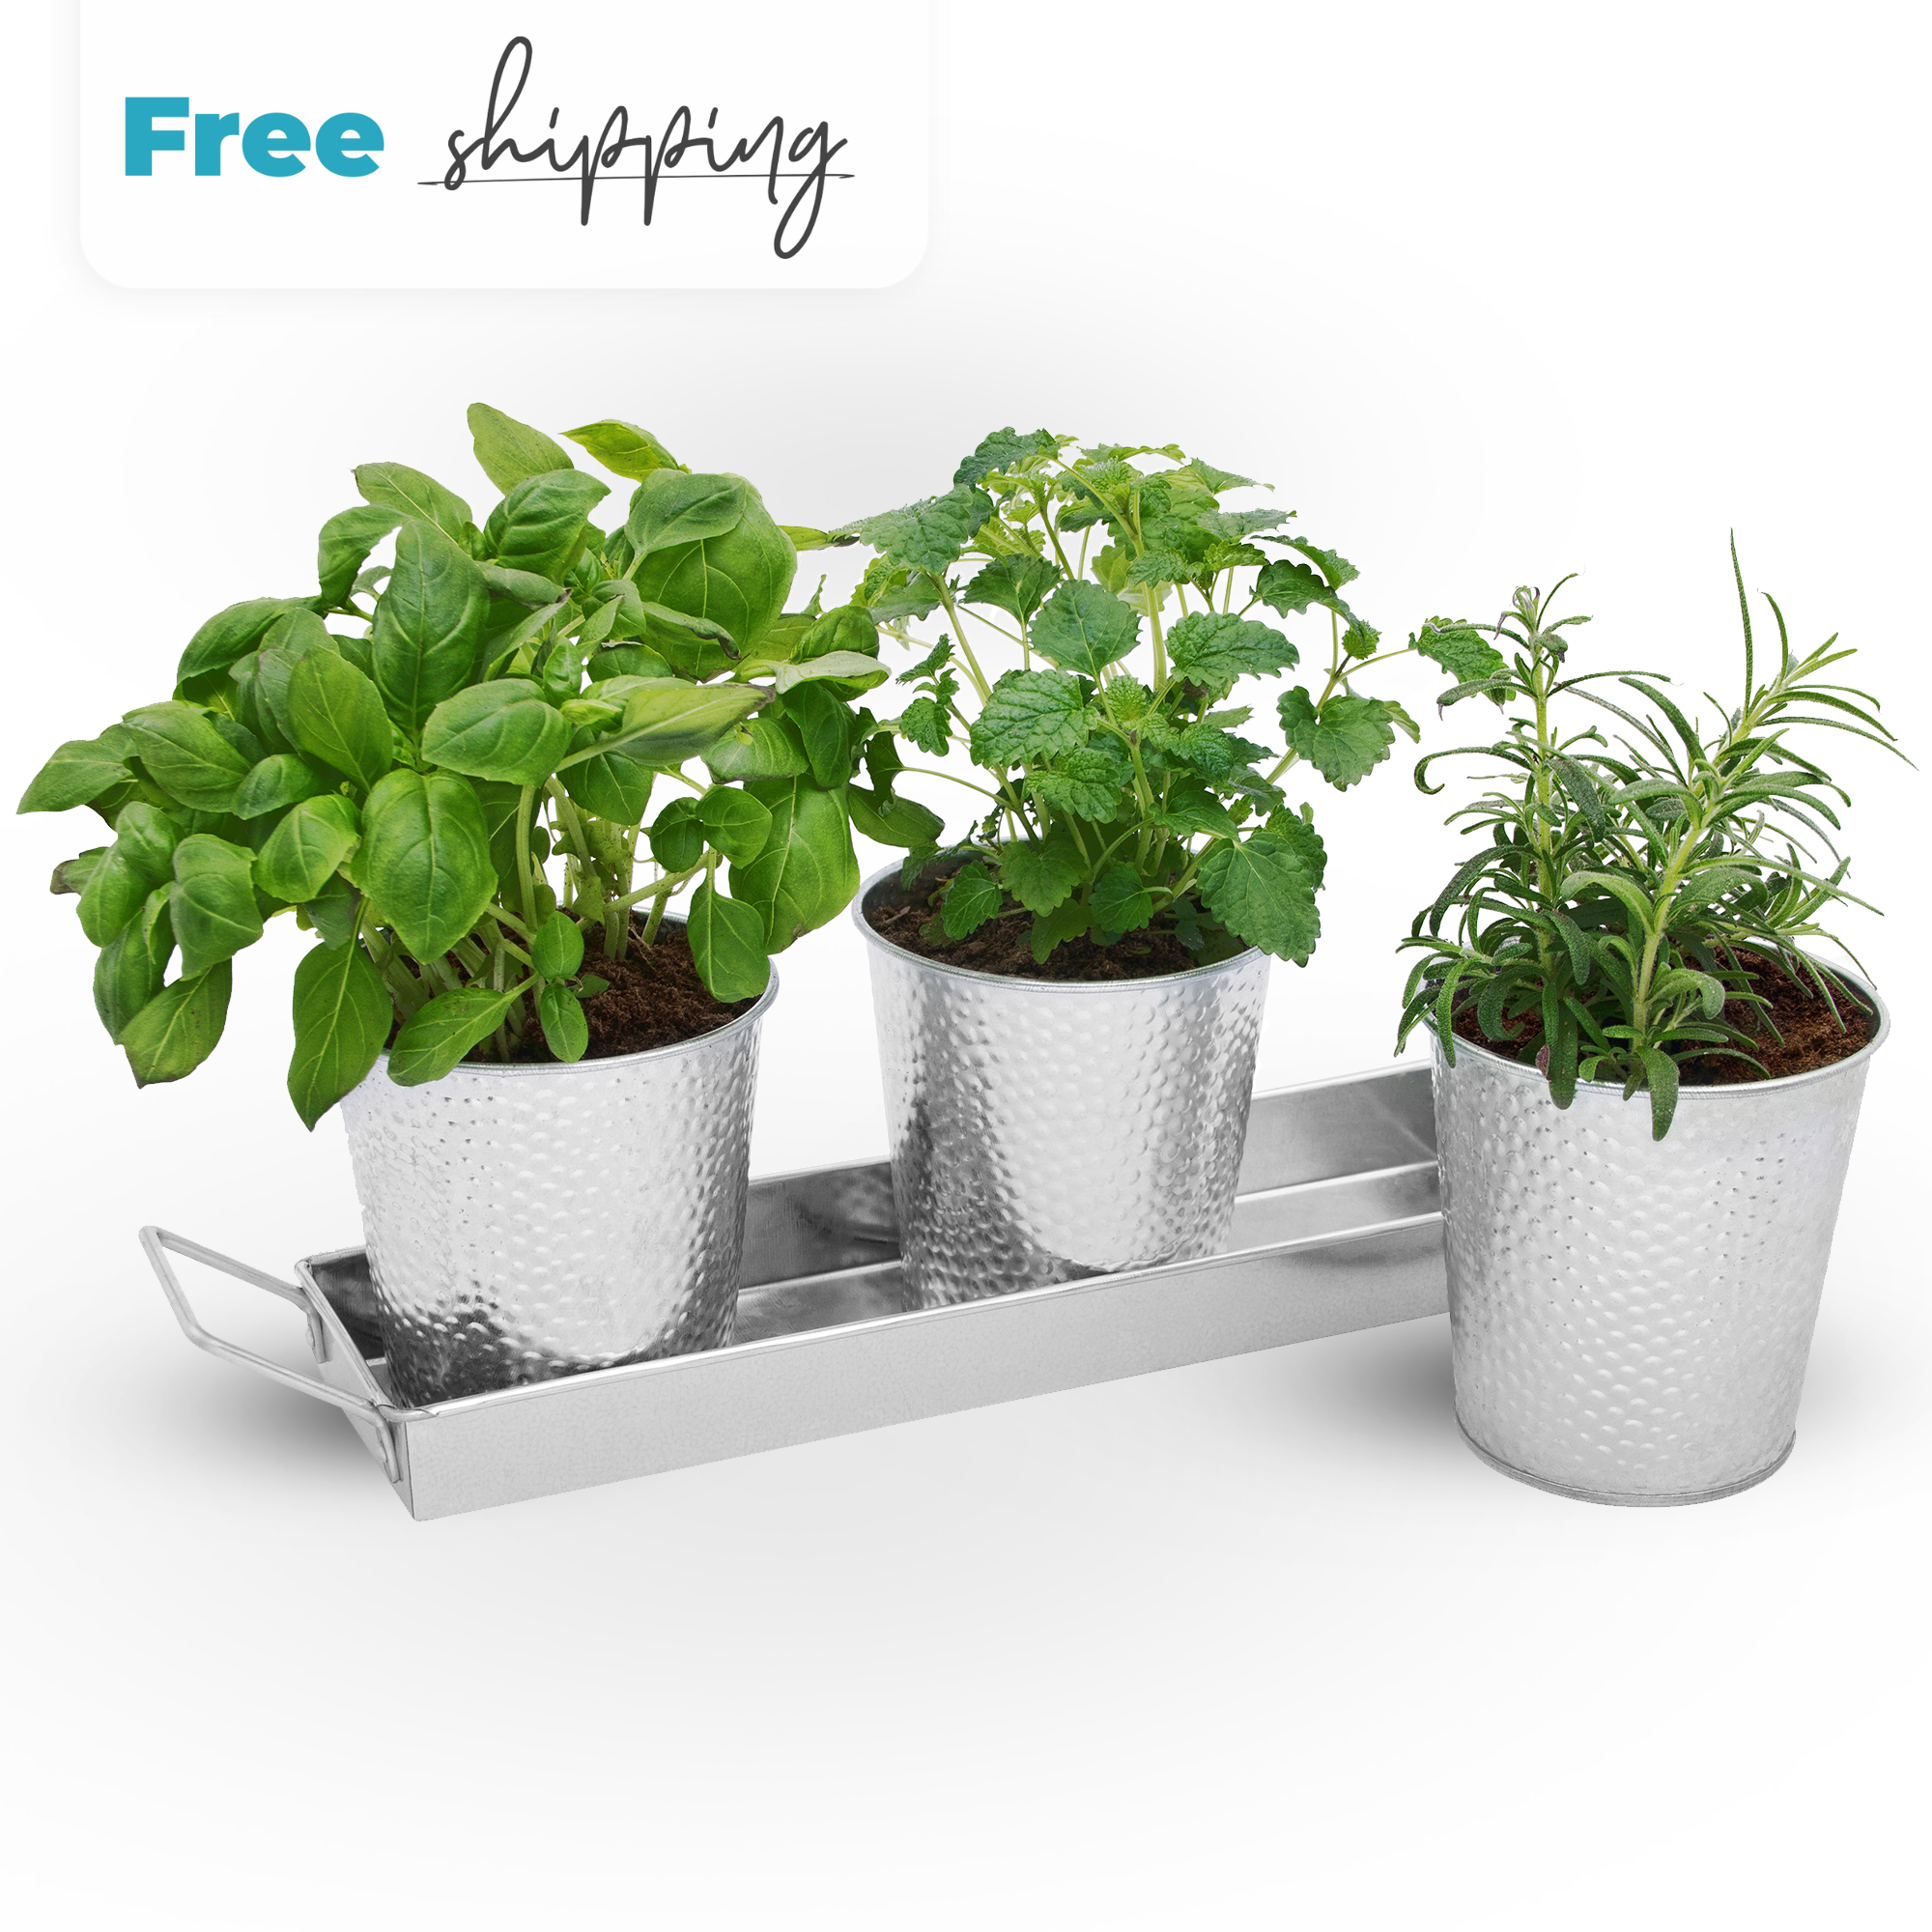 Planter pots with tray set featuring nice herbs